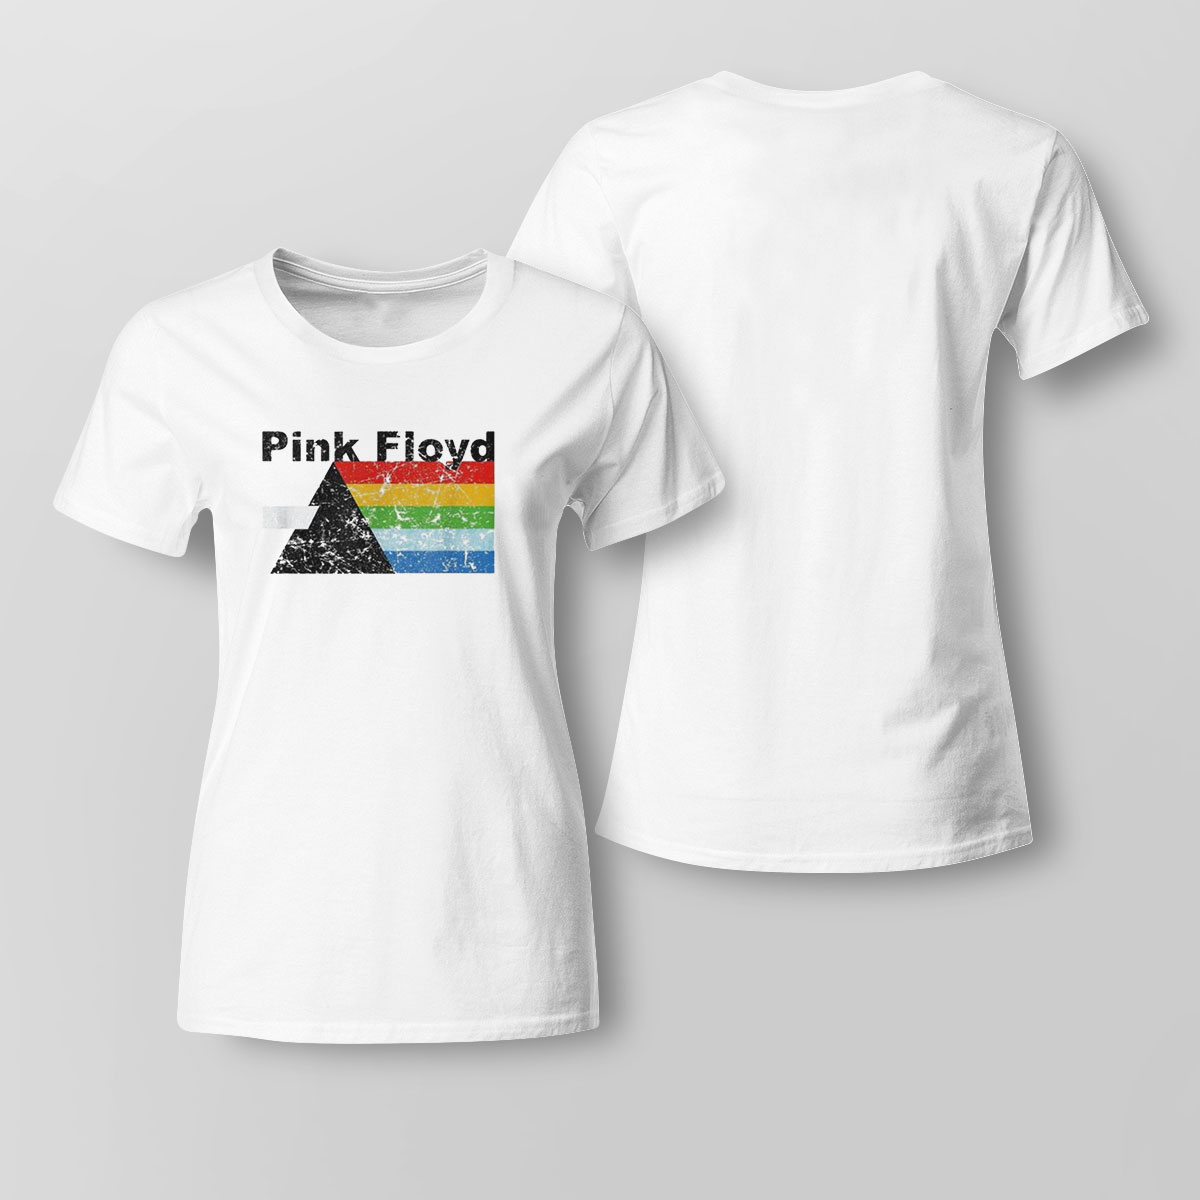 Pink Floyd The Dark Side Of The Moon Shirt